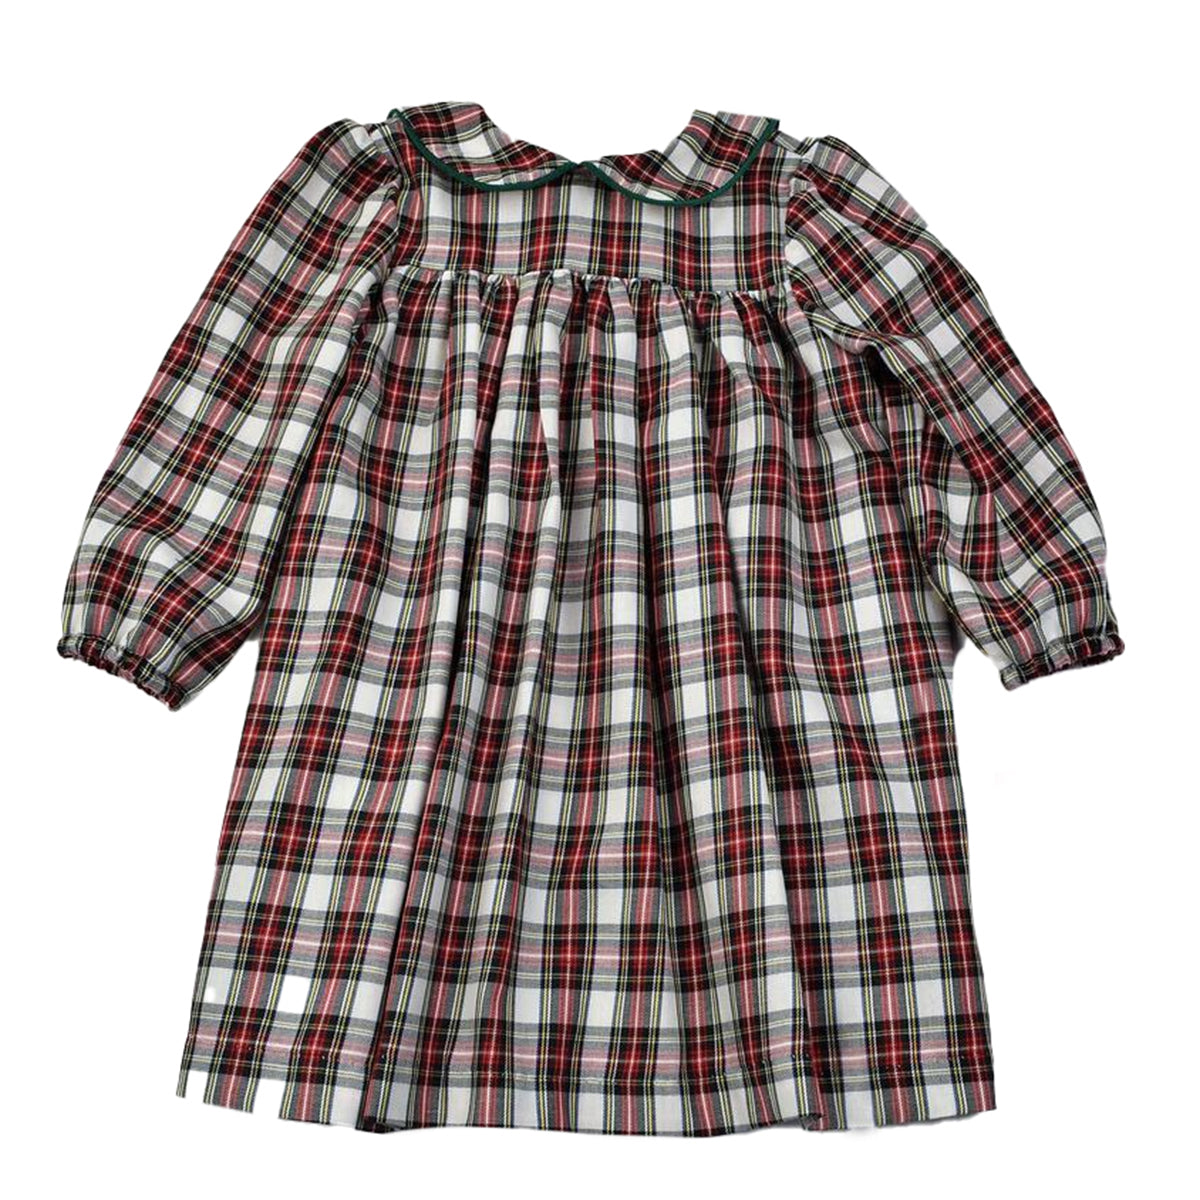 Little Girl's Holiday Plaid Dress by Funtasia Too